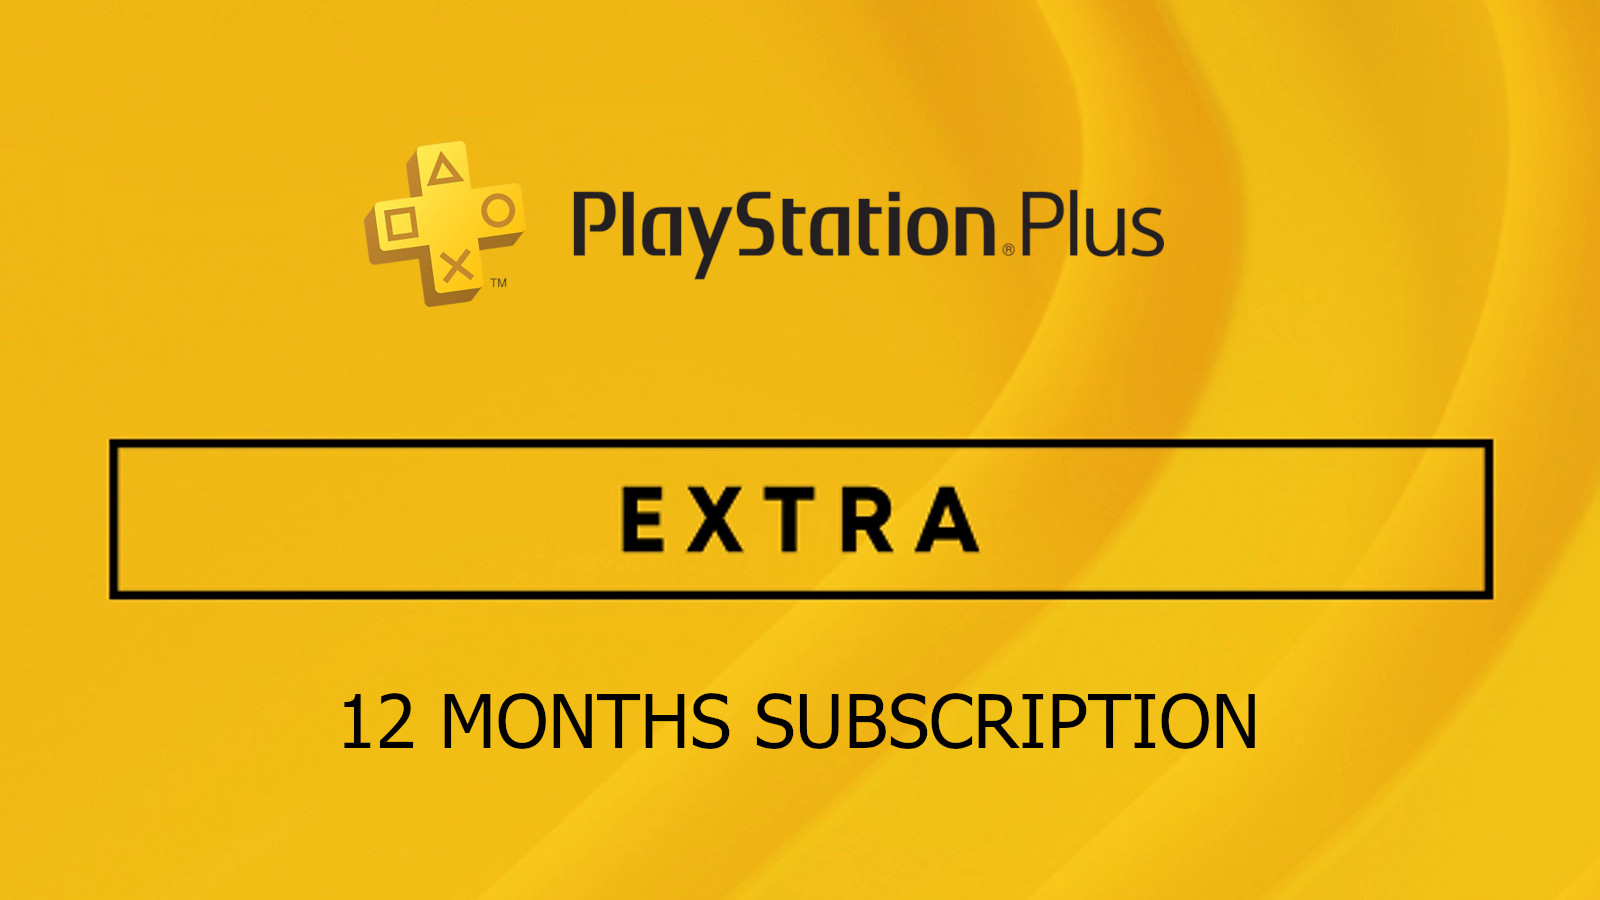 PlayStation Plus Extra 12 Months Subscription ACCOUNT $94.23